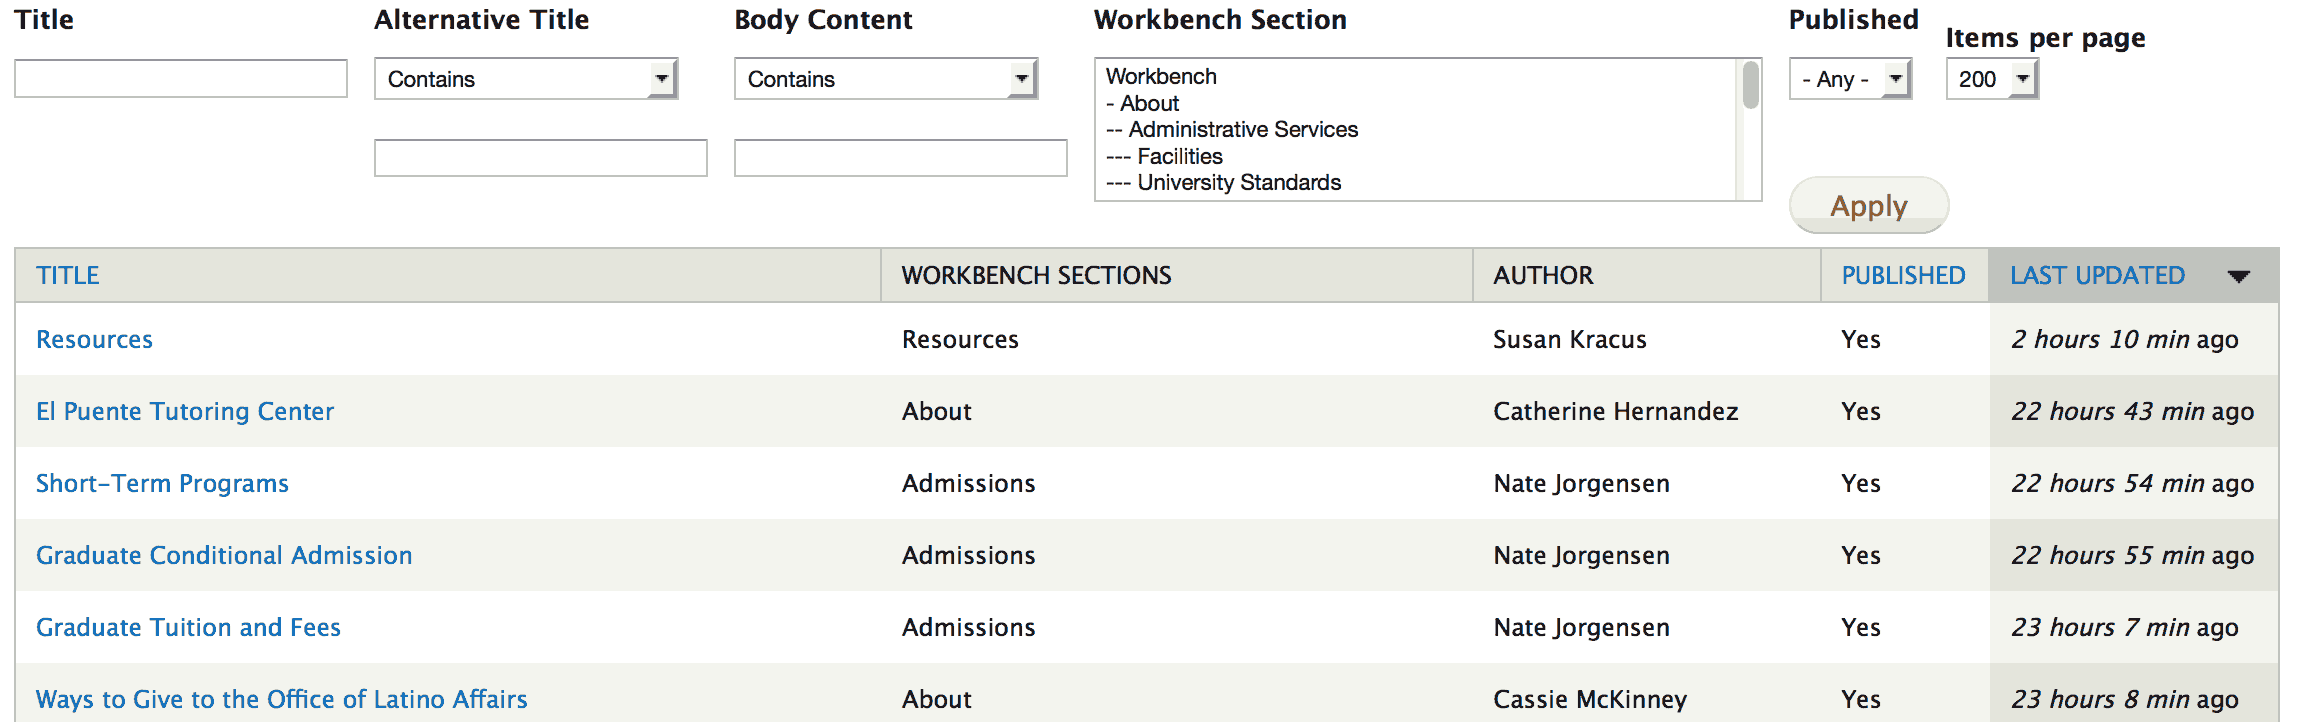 Screenshot showing Find Content tool before: table previously had 5 columns